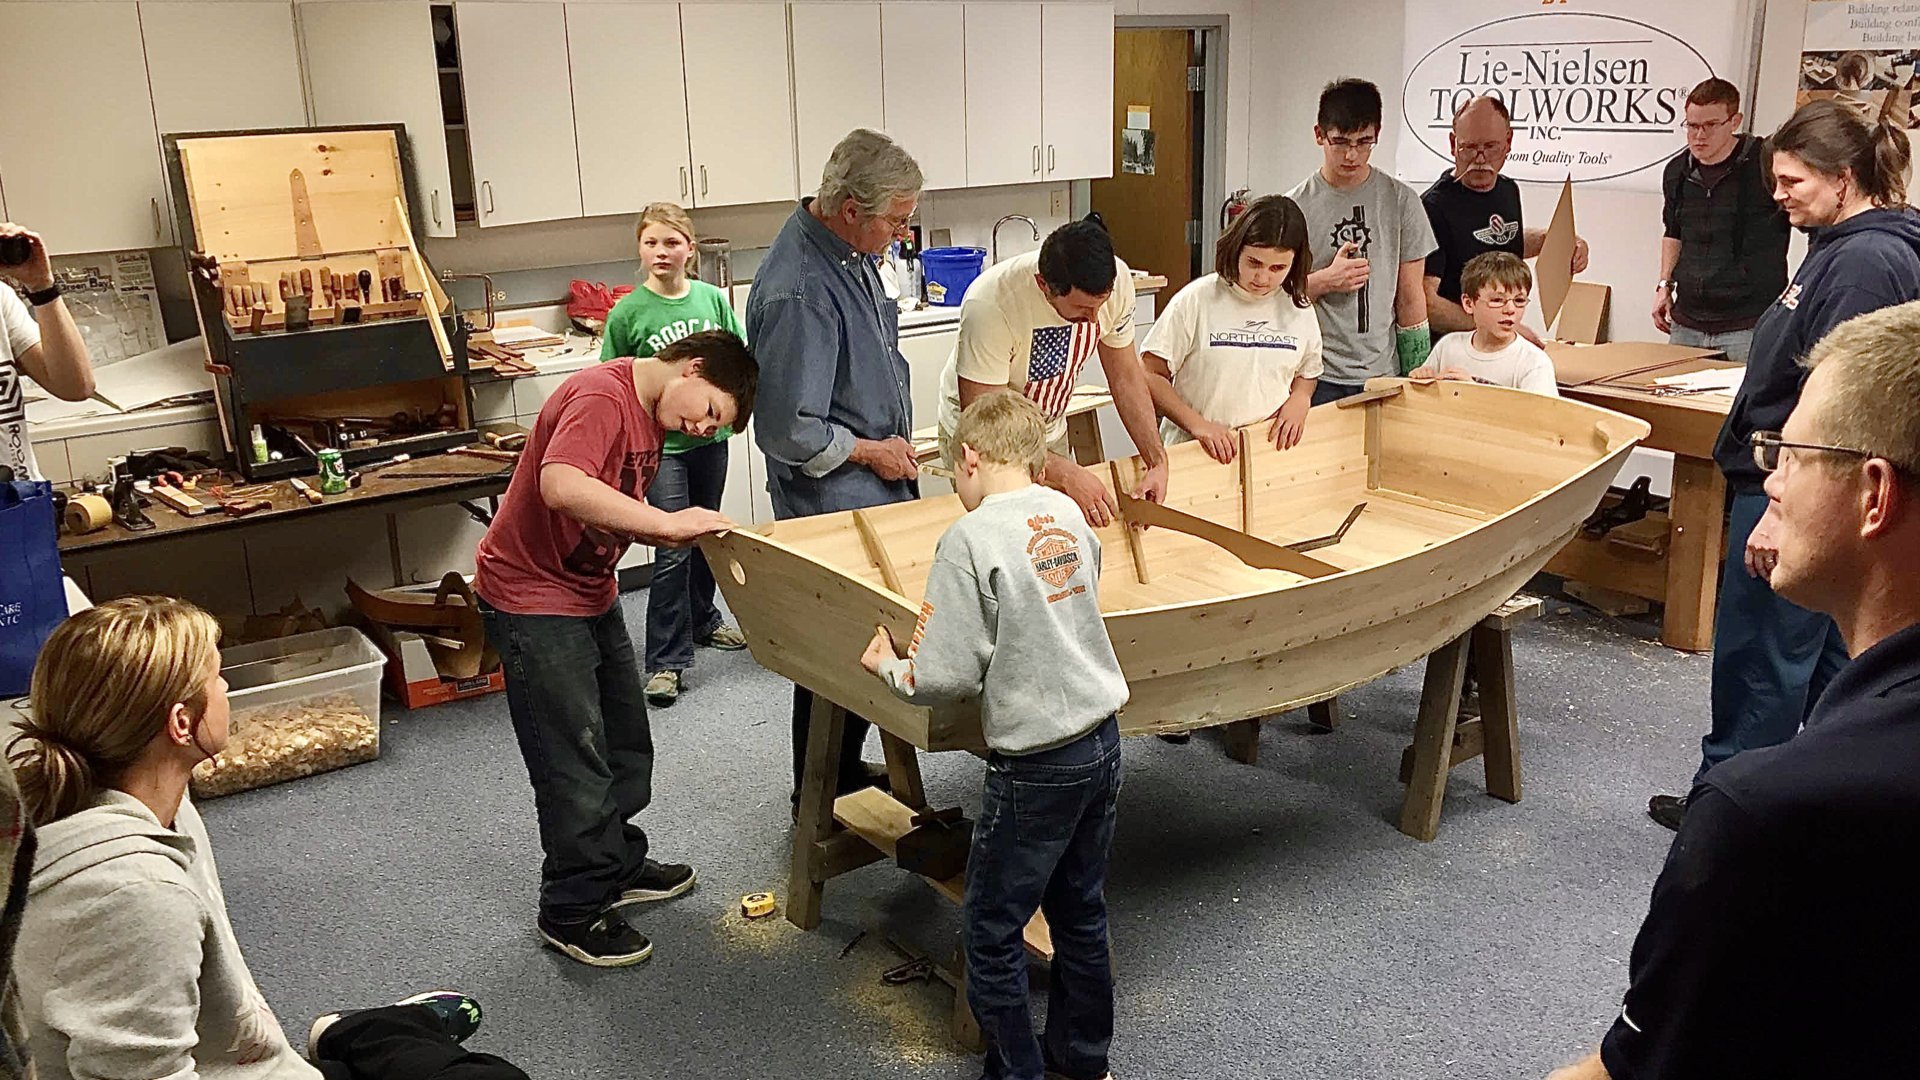 A group of children of varying ages huddle around an in-progress small boat during a boat building class. There's an adult supervising them, while others stand around and observe the process.